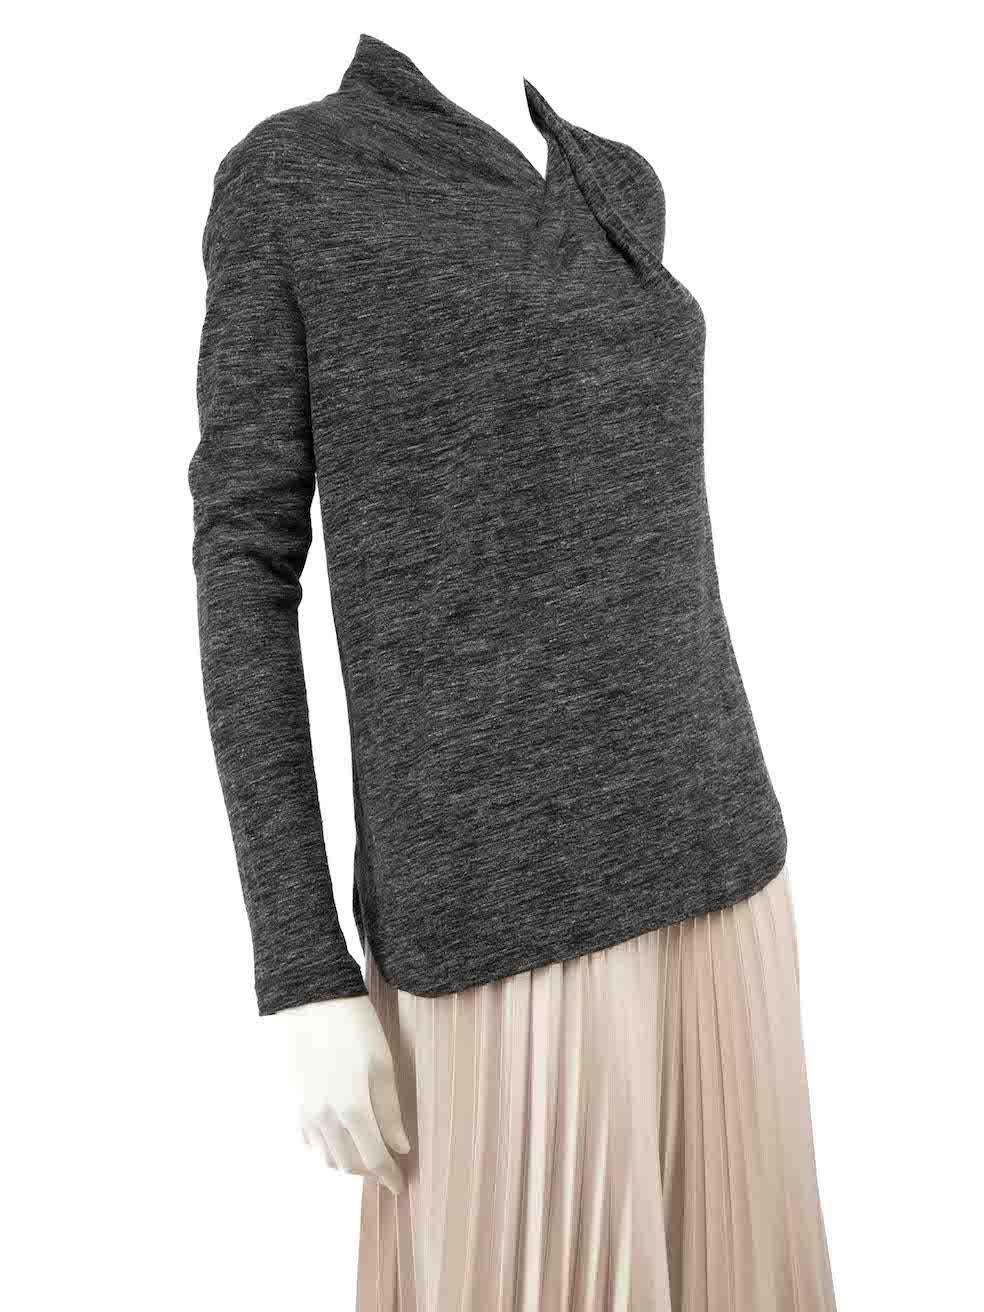 CONDITION is Very good. Hardly any visible wear to top is evident on this used Isabel Marant Etoile designer resale item.
 
 
 
 Details
 
 
 Grey
 
 Synthetic
 
 Long sleeves top
 
 Marl pattern
 
 Round neckline
 
 Gathered neckline detail
 
